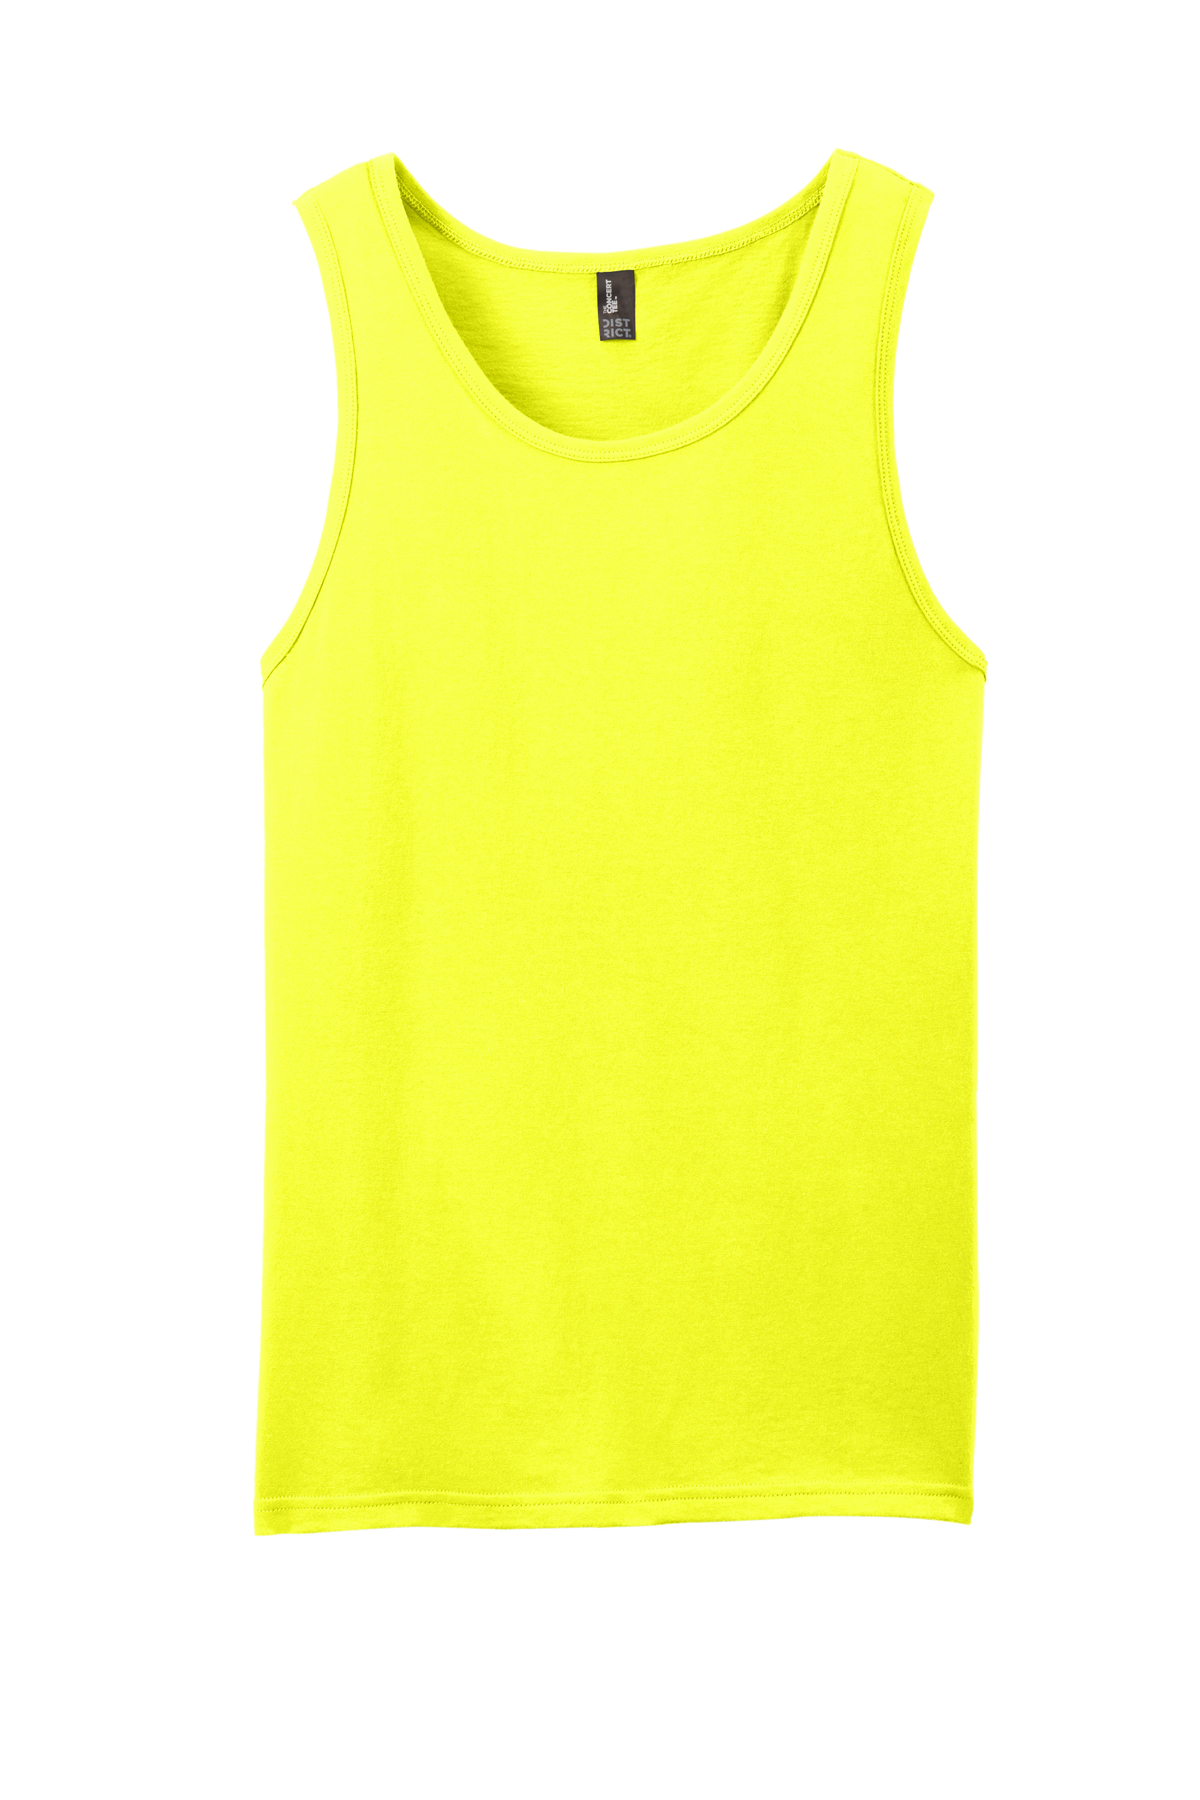 District The Concert Tank | Product | SanMar